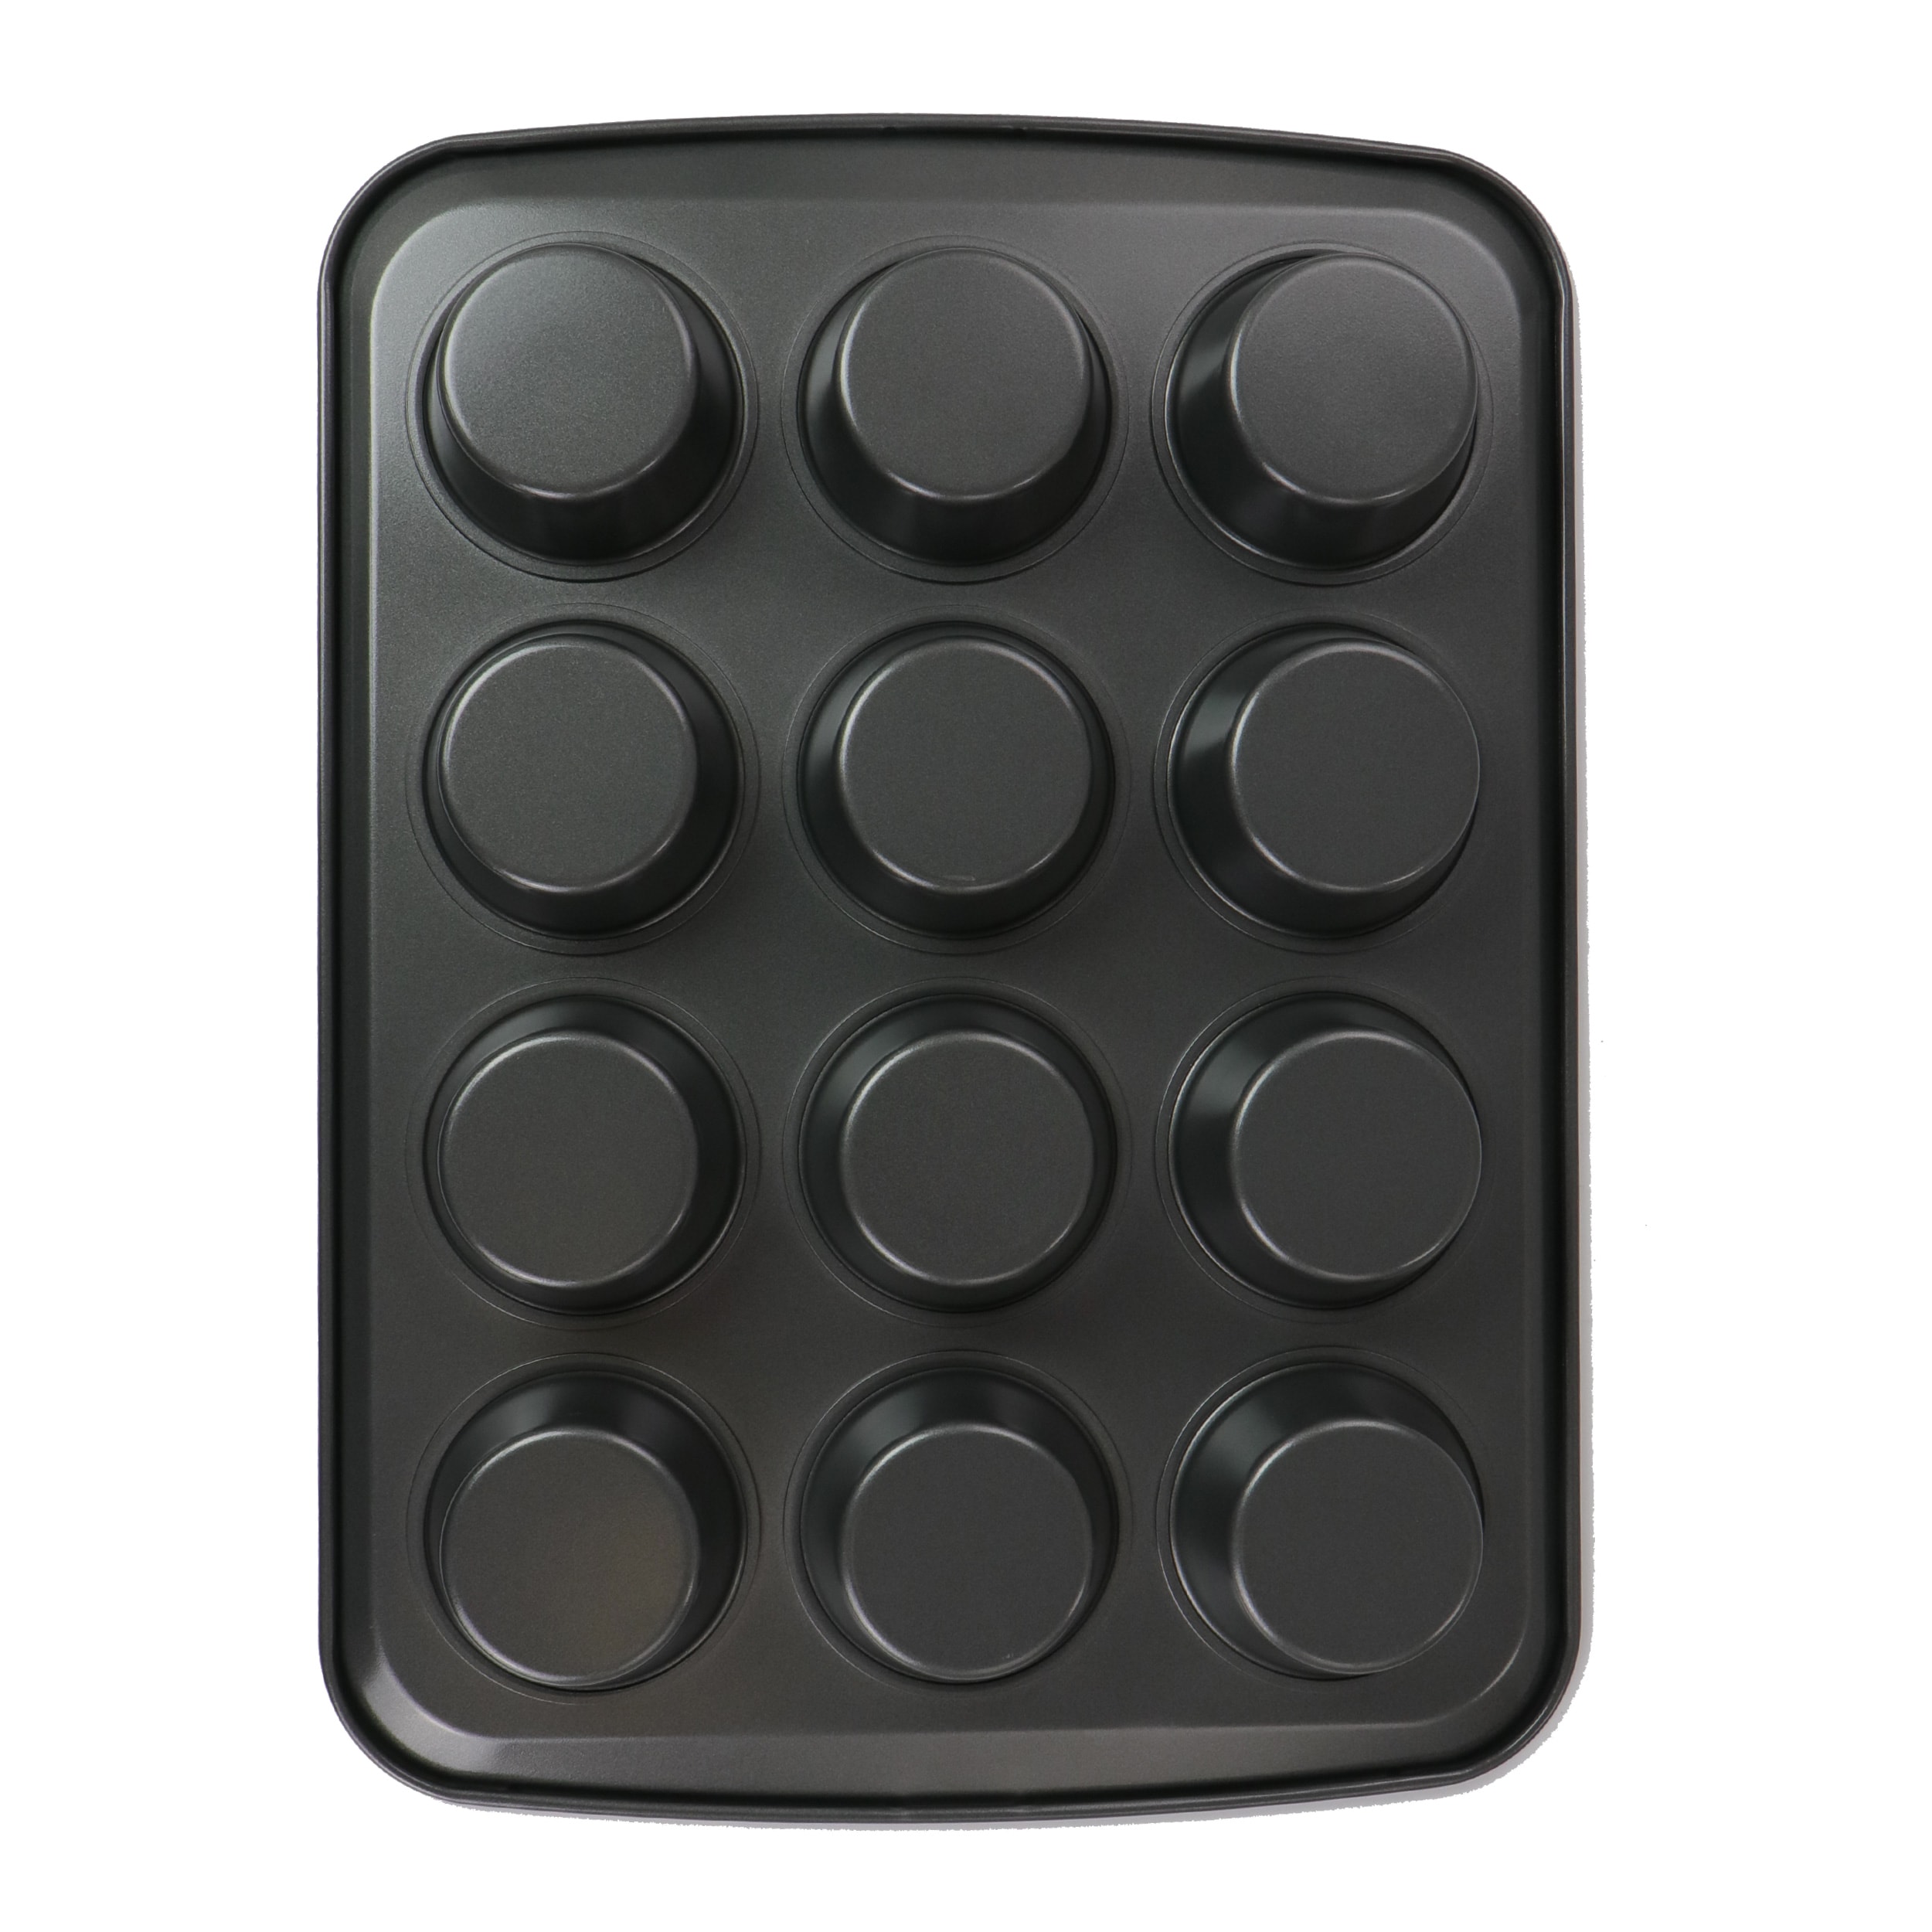 Martha Stewart Everyday Nonstick 6 or 12-Cup Muffin Pan